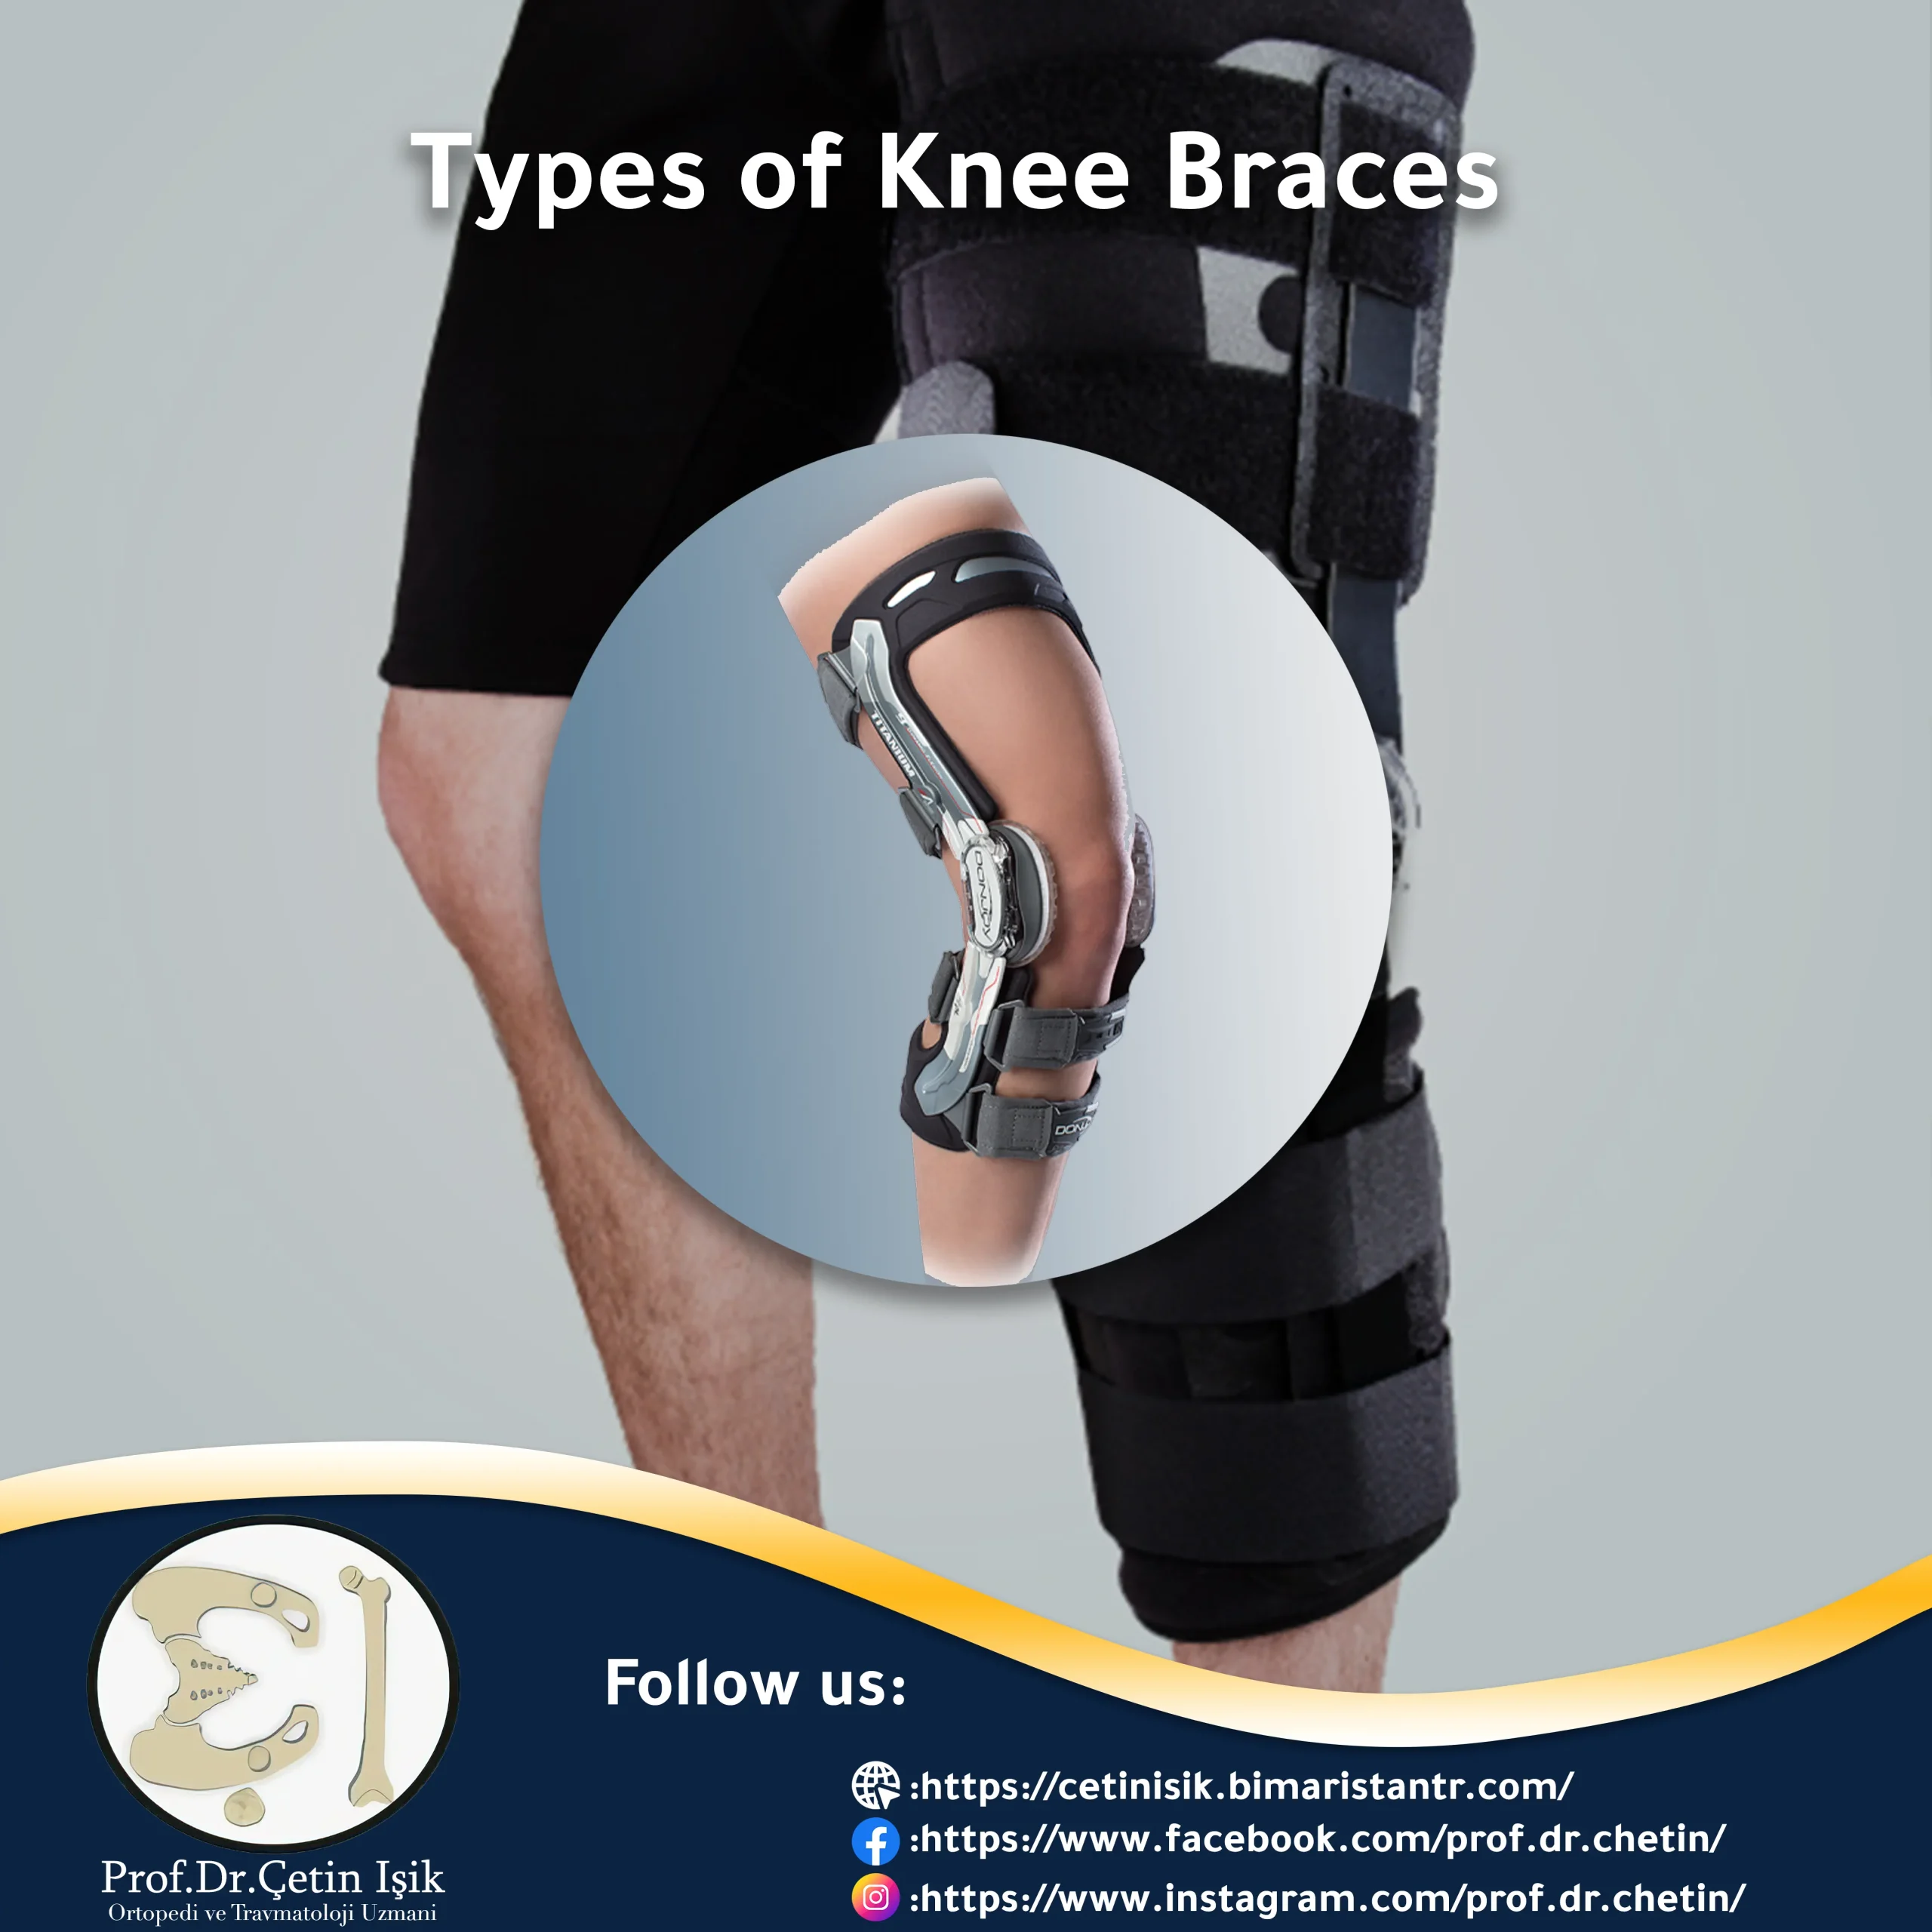 Image showing the types of knee braces